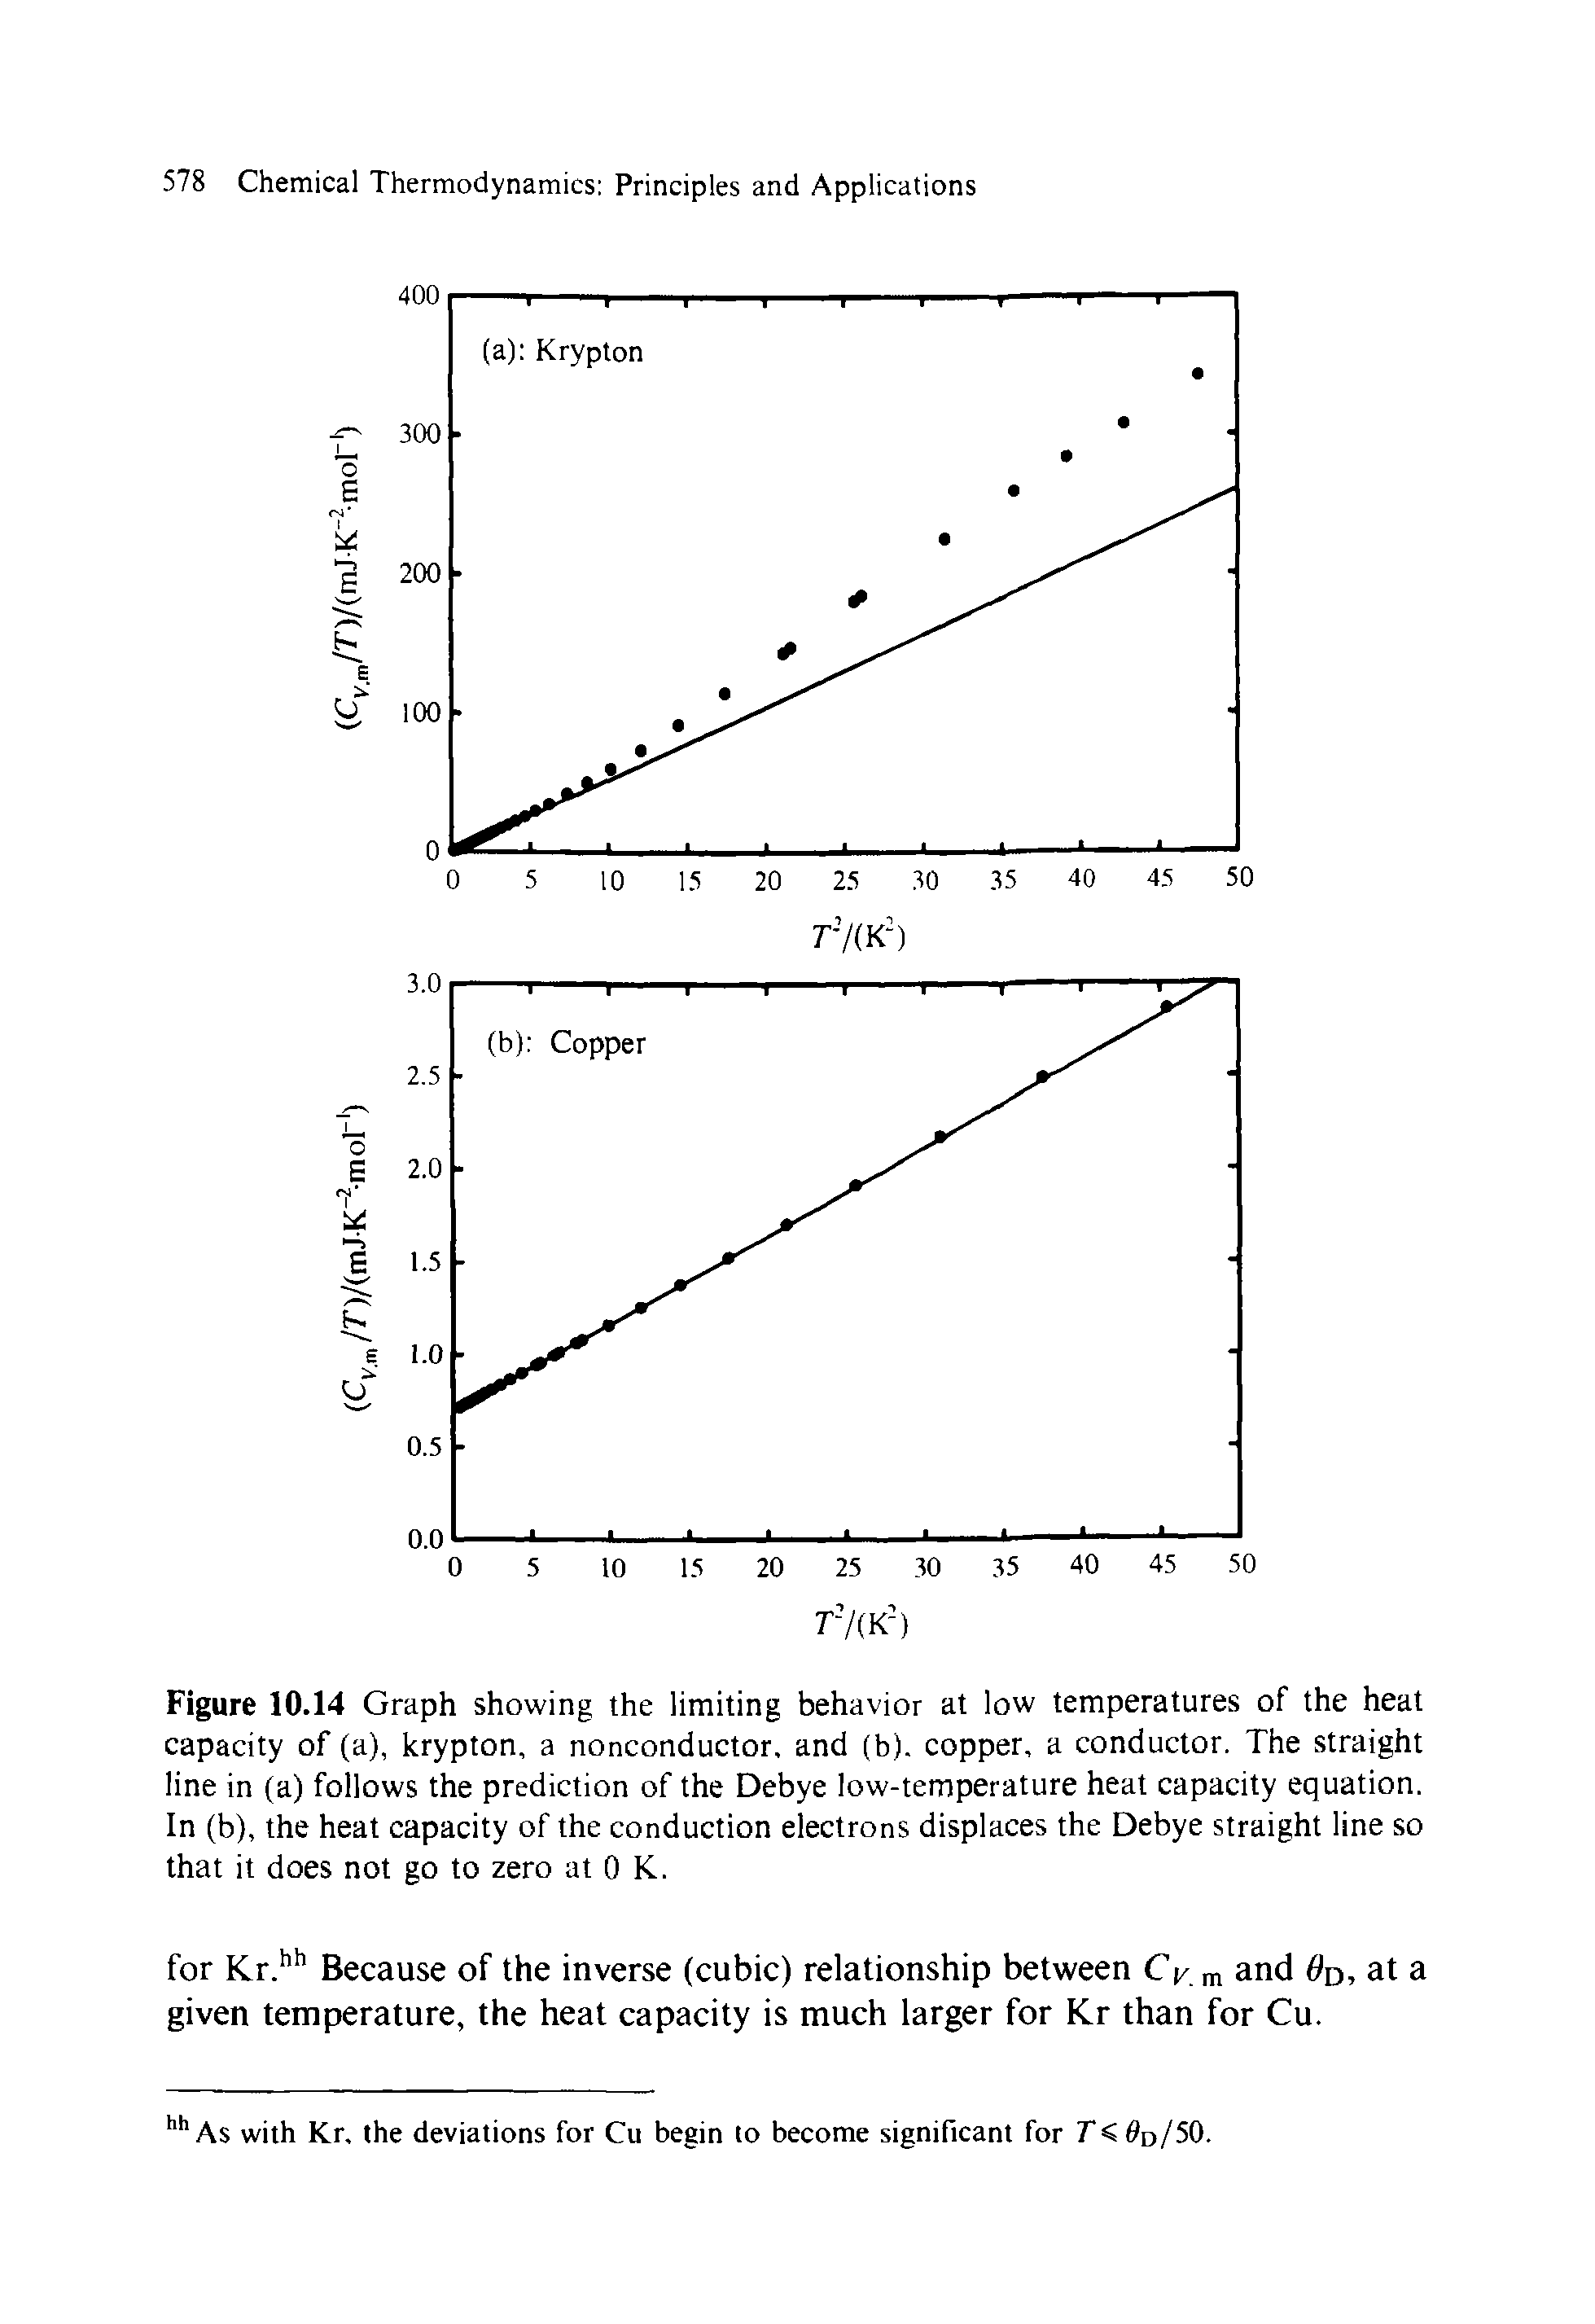 Figure 10.14 Graph showing the limiting behavior at low temperatures of the heat capacity of (a), krypton, a nonconductor, and (b). copper, a conductor. The straight line in (a) follows the prediction of the Debye low-temperature heat capacity equation. In (b), the heat capacity of the conduction electrons displaces the Debye straight line so that it does not go to zero at 0 K.